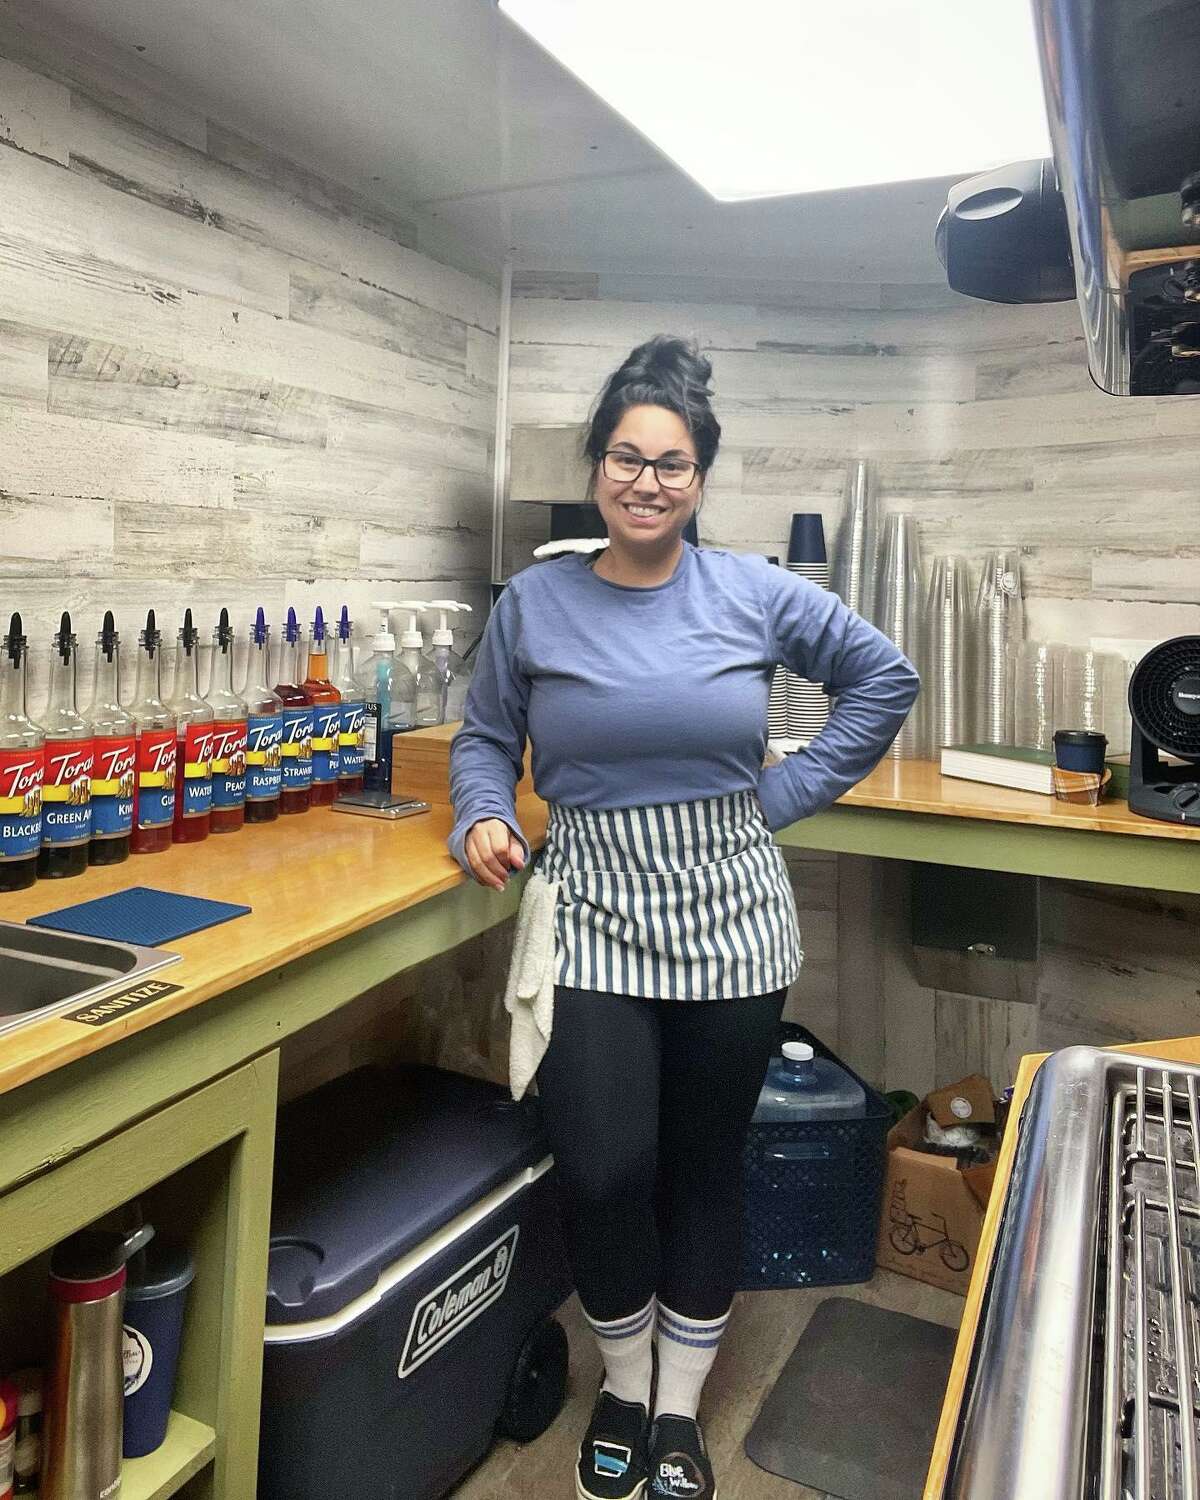 Blue Willow Coffee opened its doors to Willis on Nov. 8 as the city's first coffee trailer business. Owner Melissa Jones became interested in coffee when she started drinking coffee milk with her grandma at a young age.